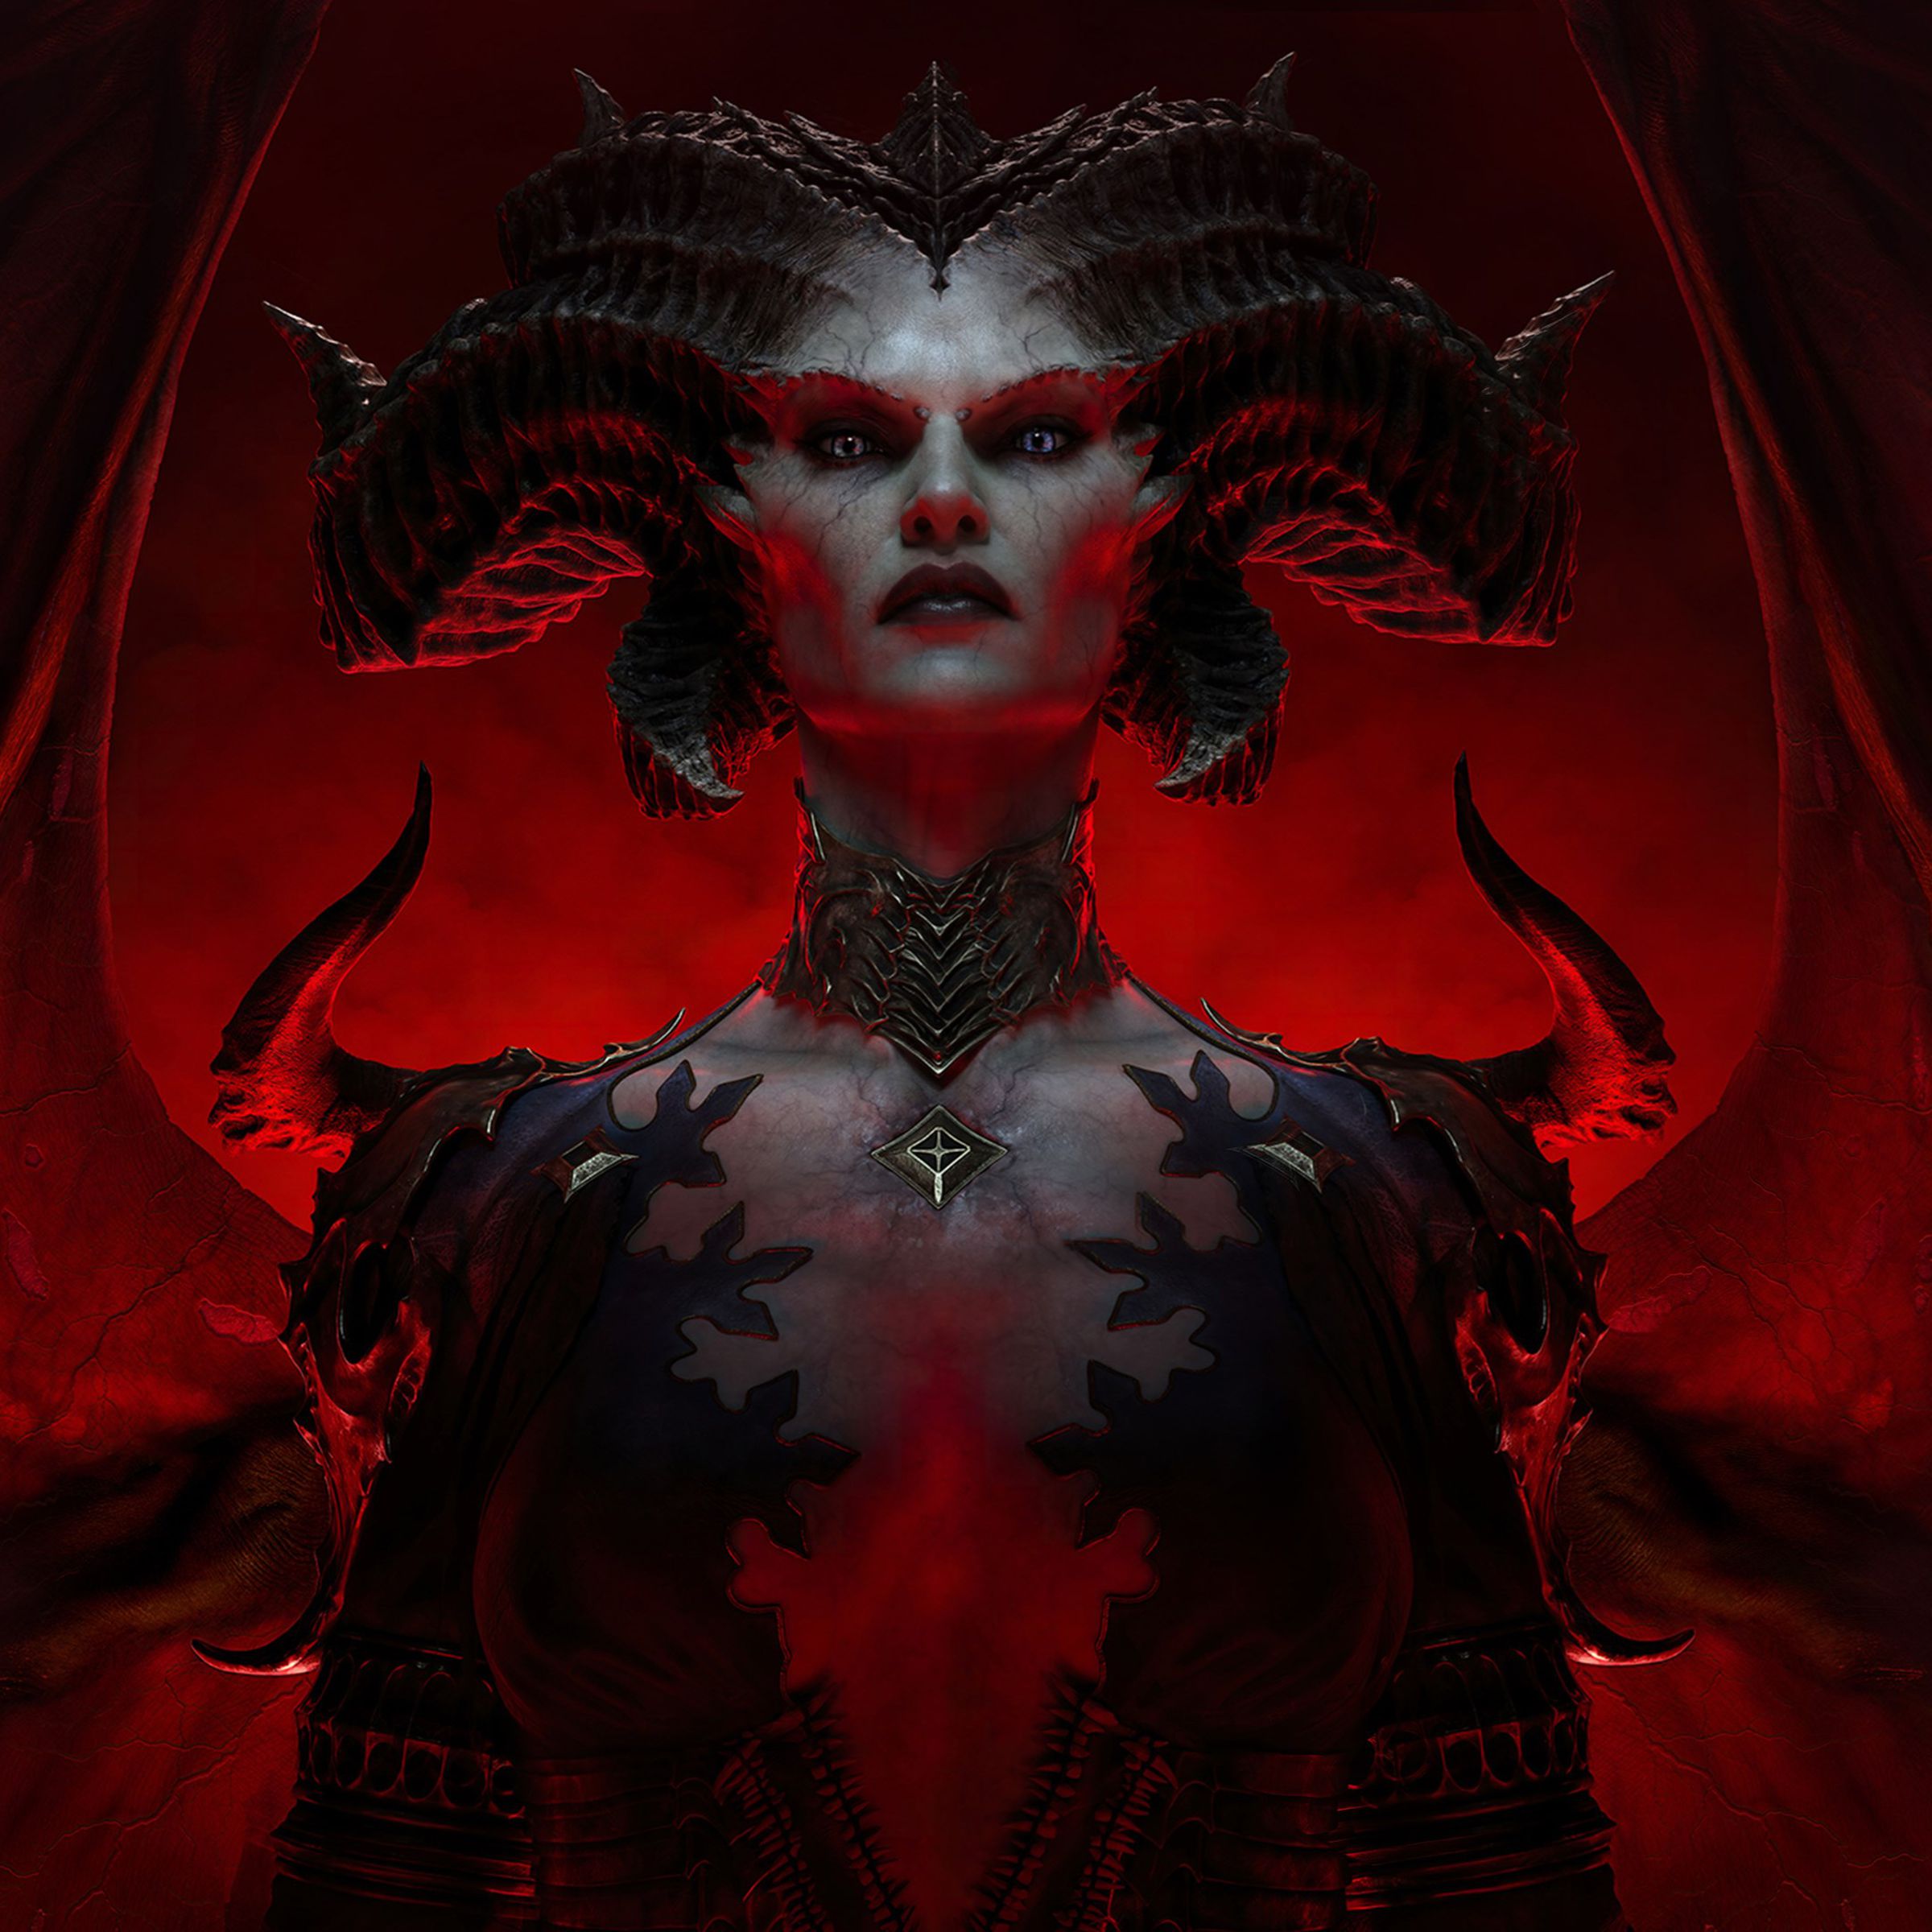 Promotional art for the video game Diablo IV.